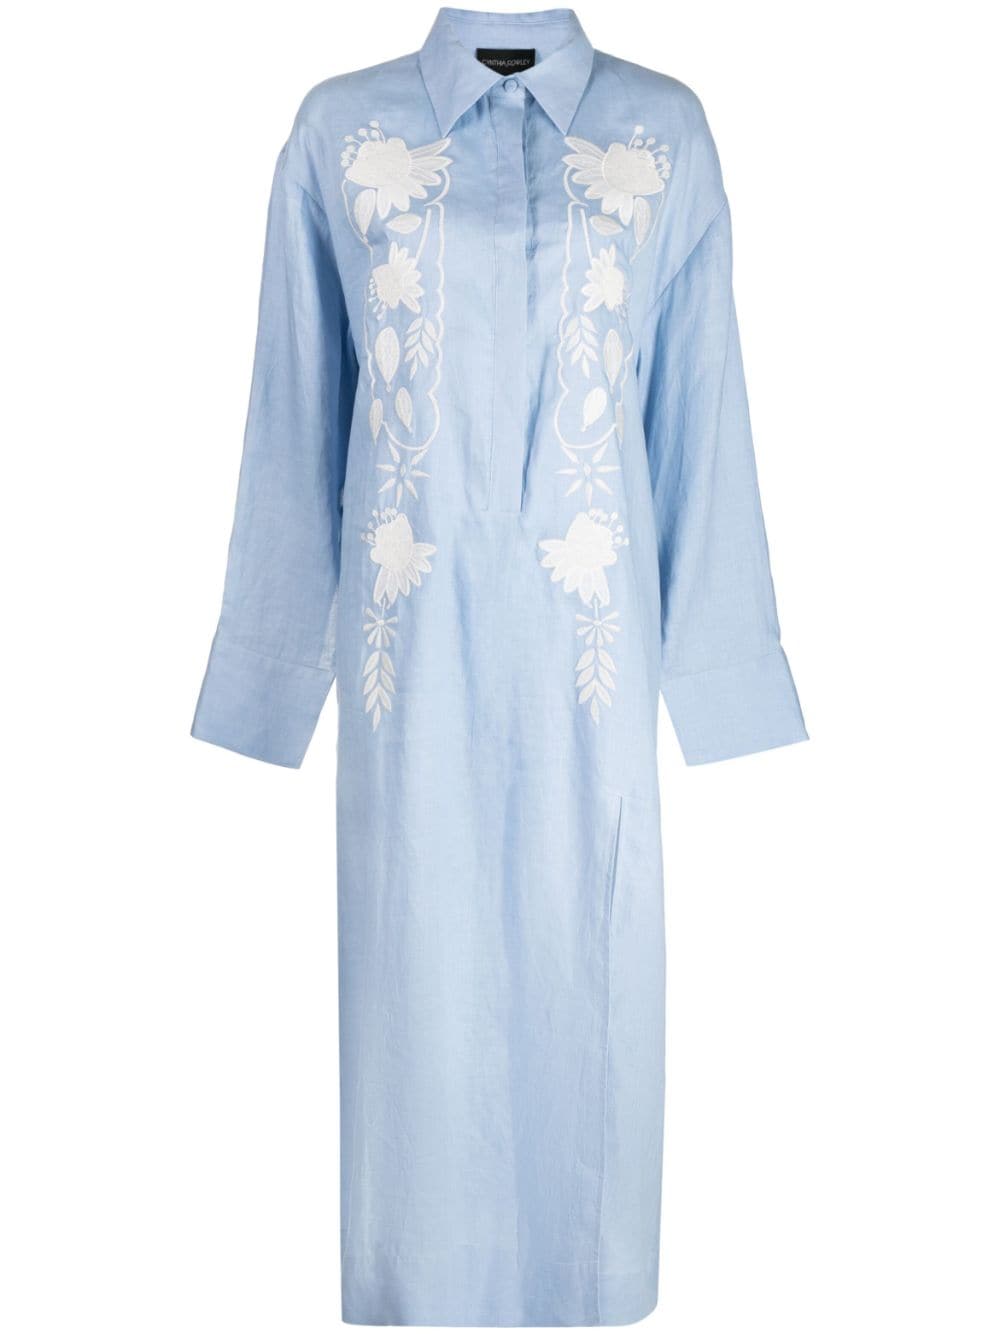 Cynthia Rowley floral-embroidered shirt dress - Blue